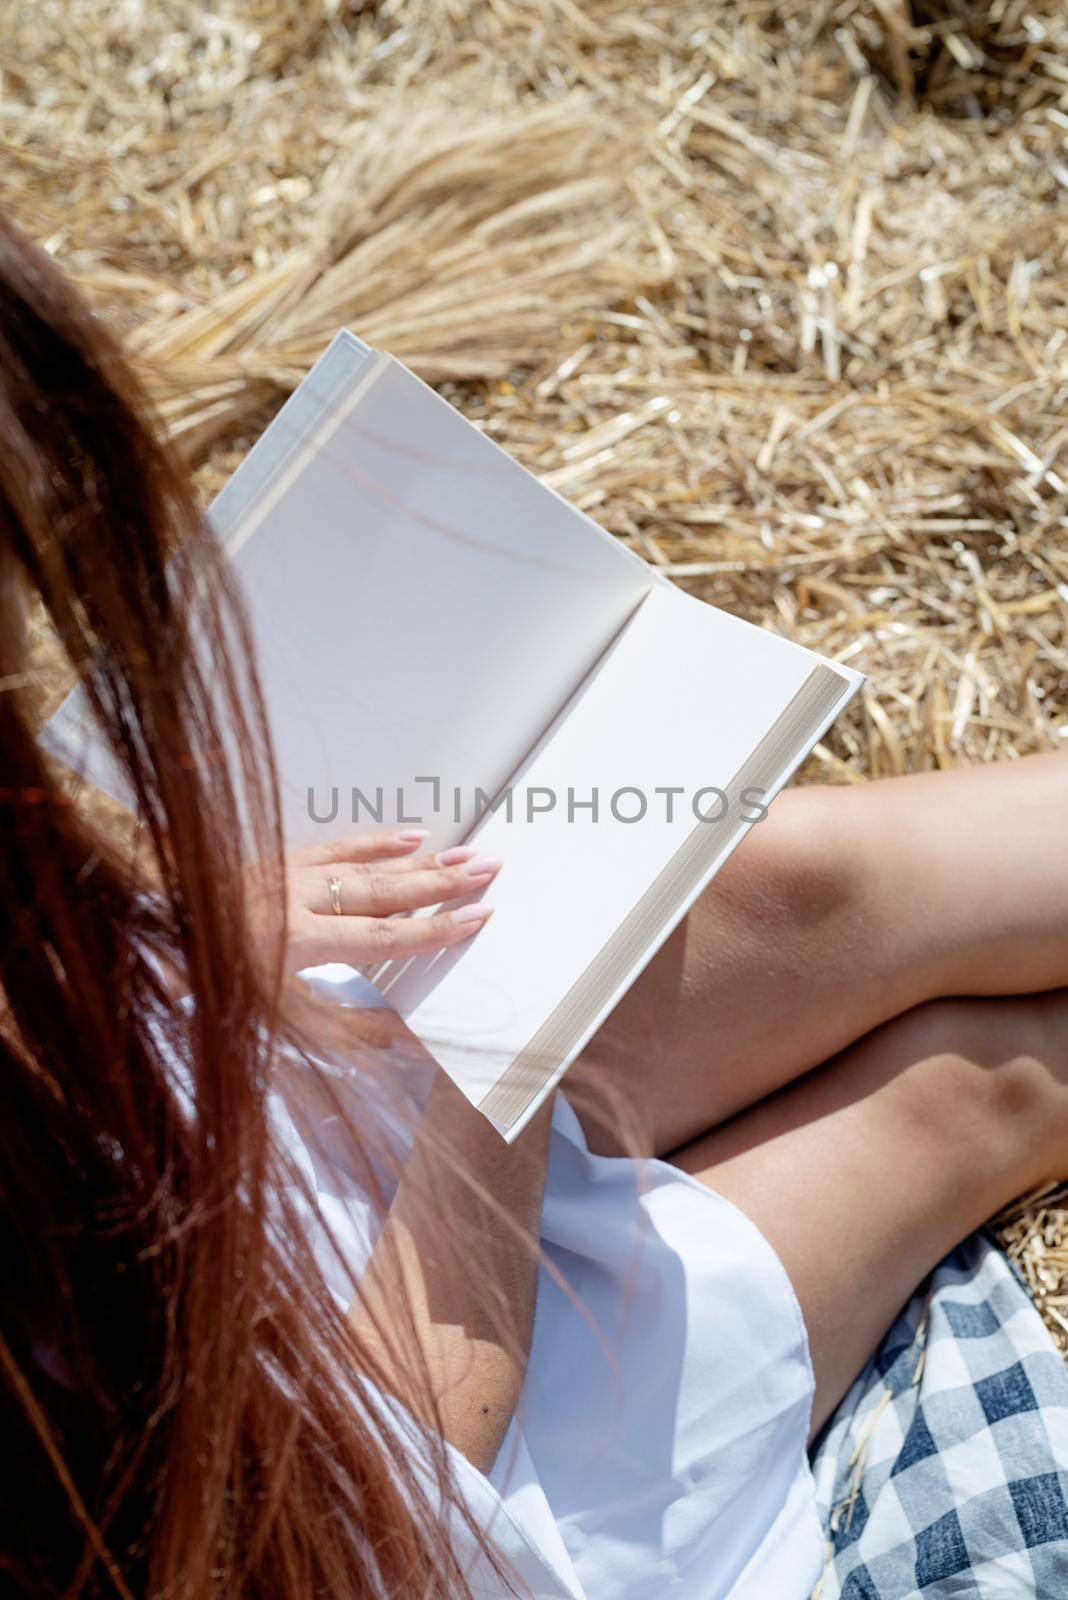 Young woman in white dress sitting on haystack in harvested field, reading blank book. Book mockup by Desperada